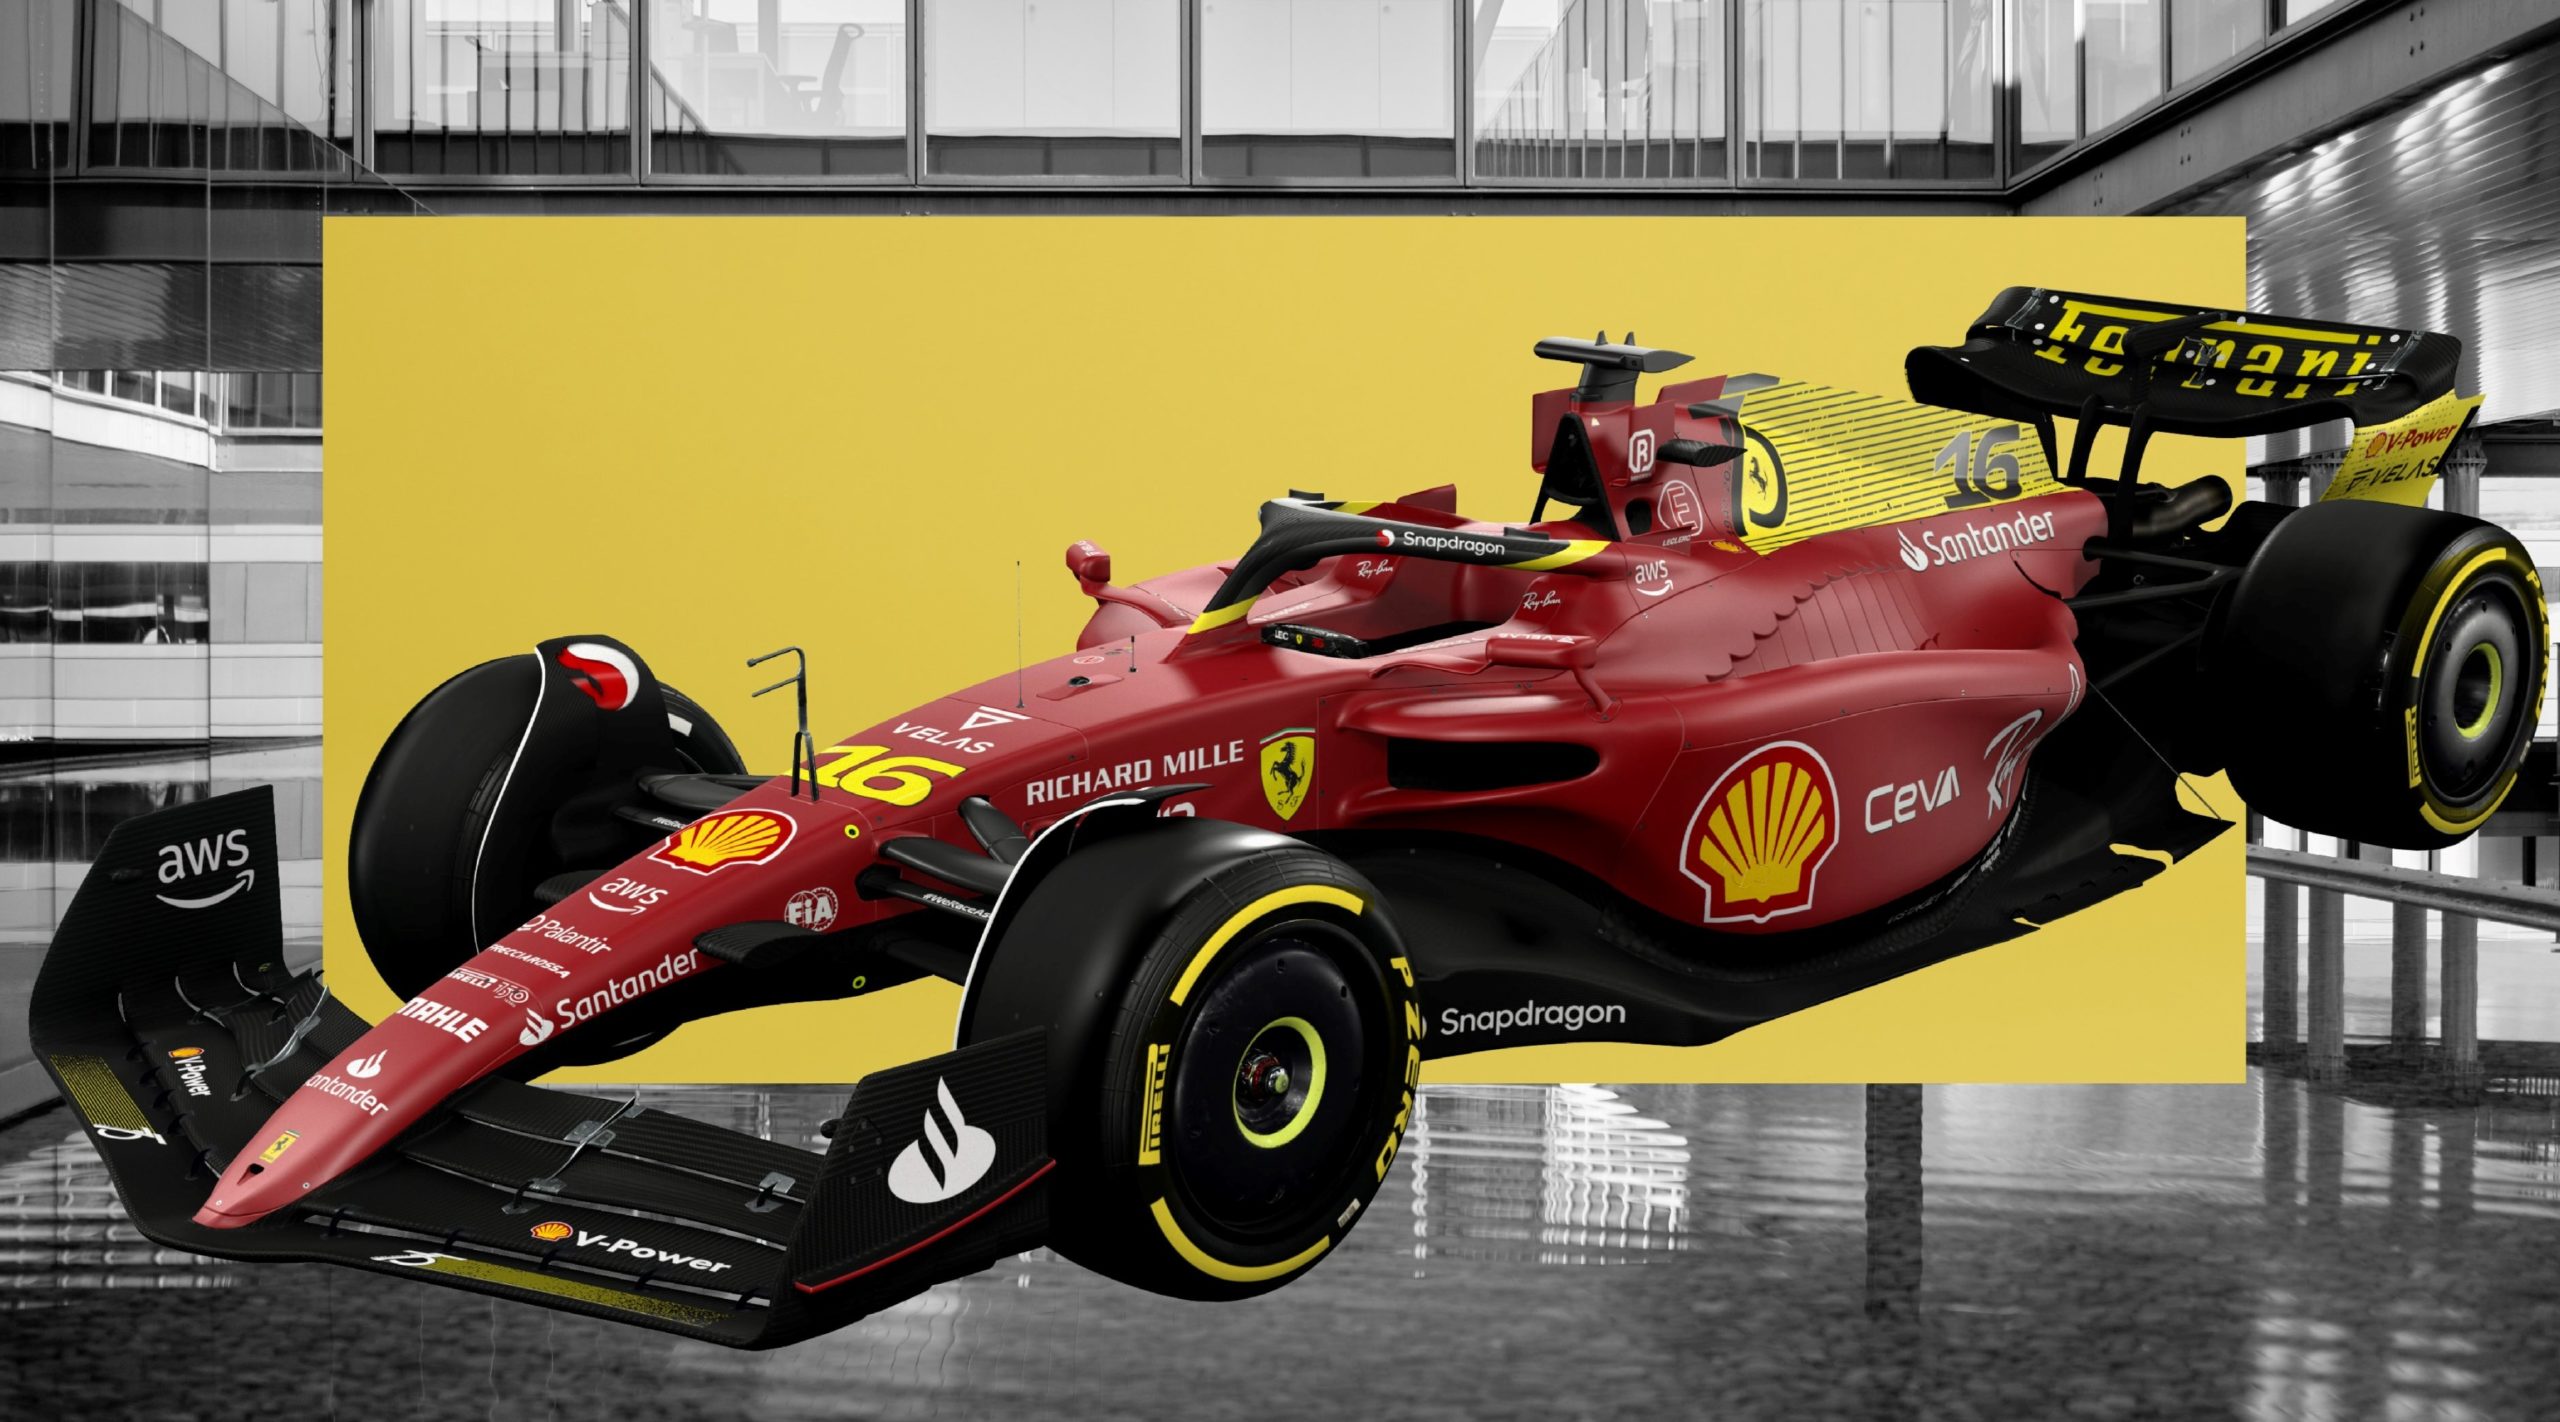 Ferrari unveils yellow themed livery for Italian Grand Prix scaled